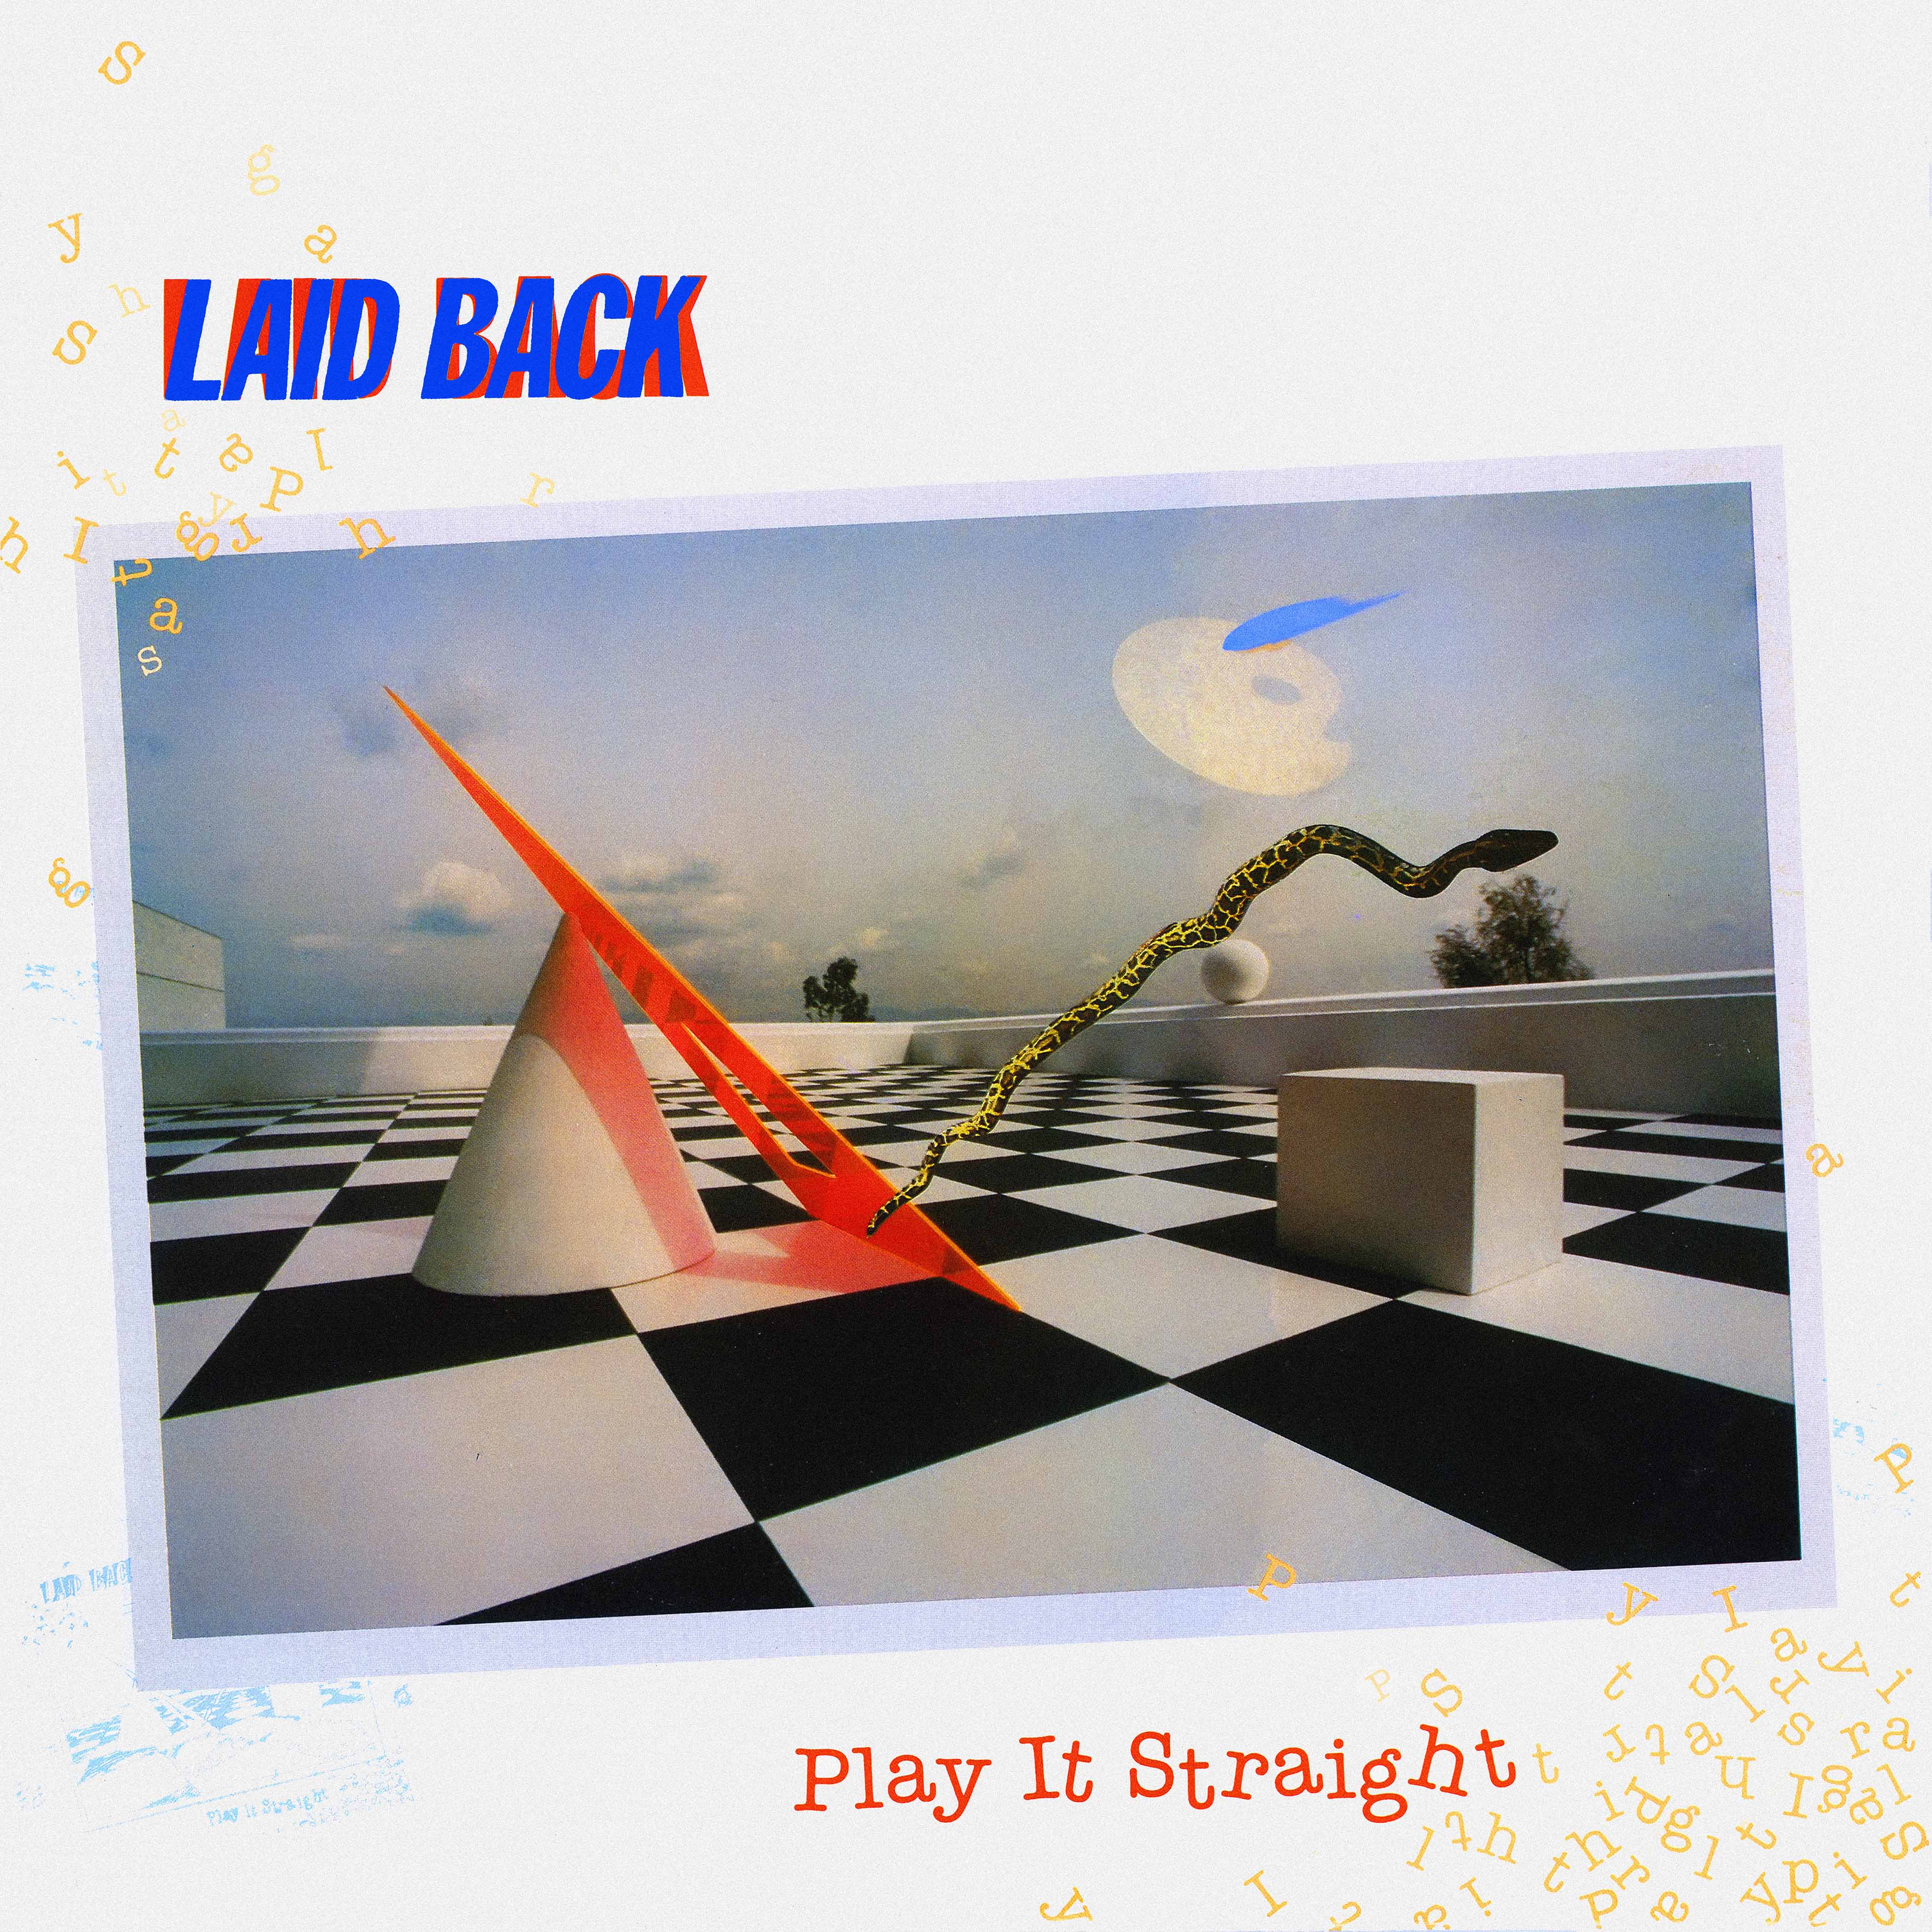 Back flac. Laid back "Play it straight".